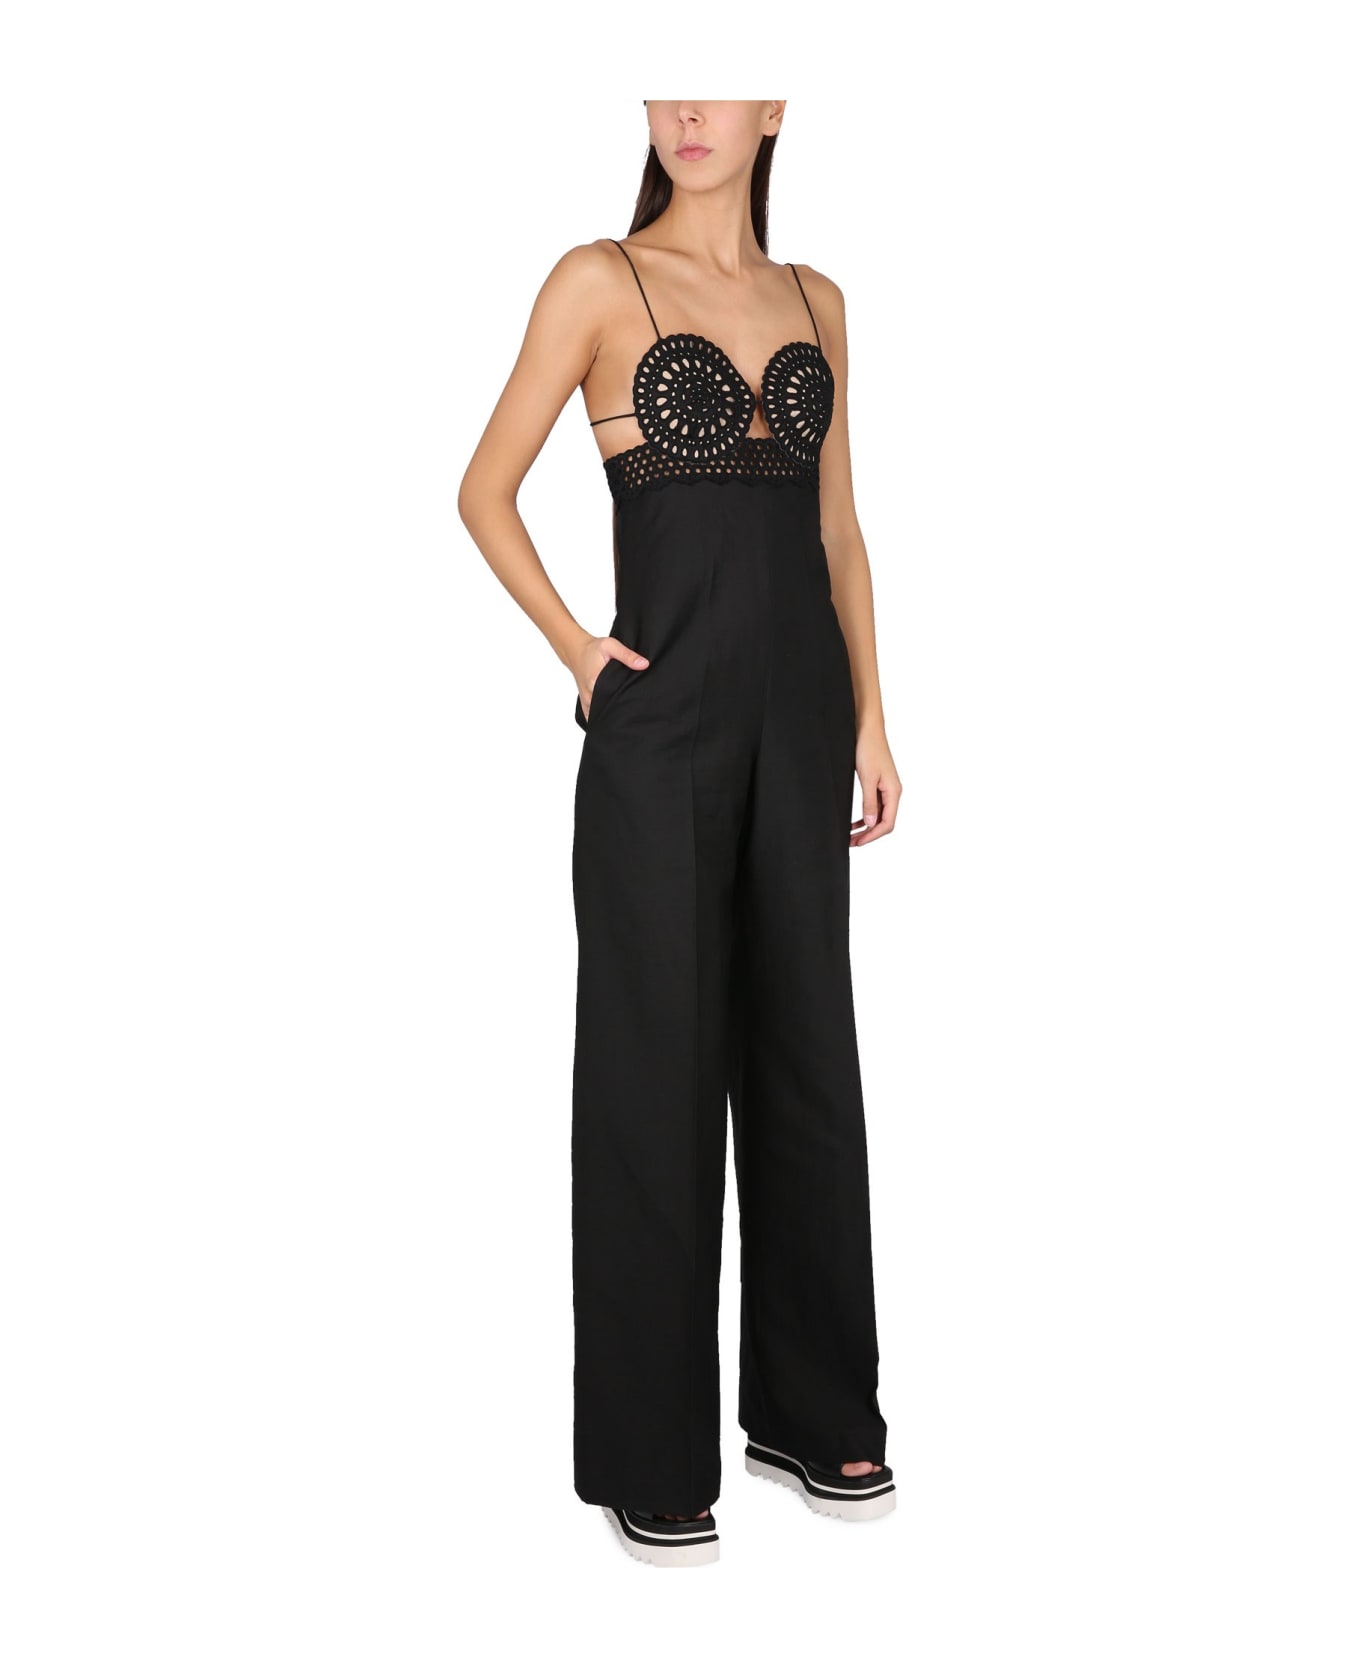 Stella McCartney Broderie Anglaise Bustier Jumpsuit - Black ジャンプスーツ